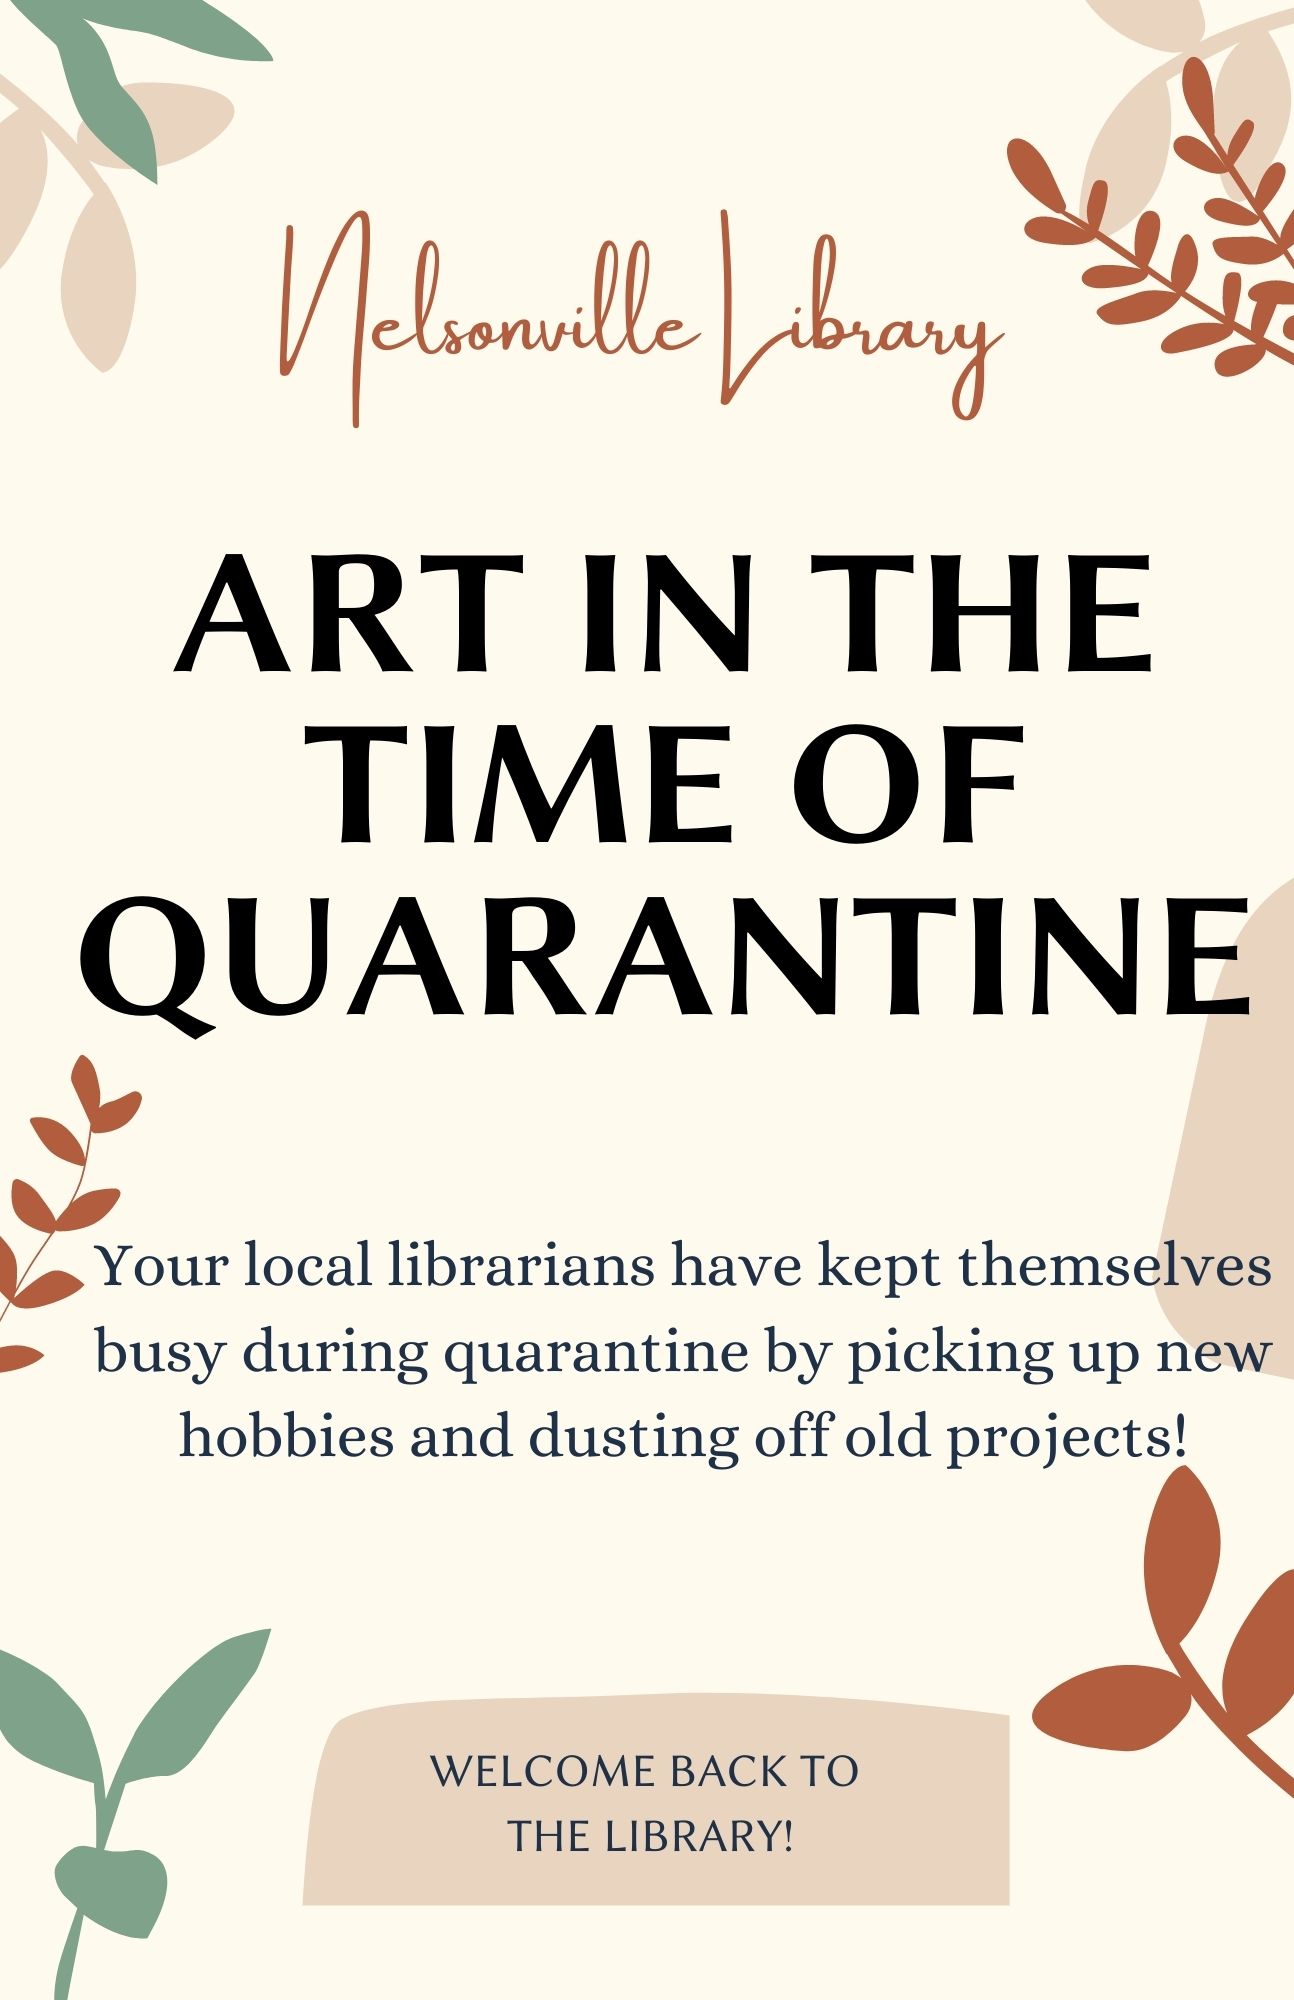 Art in the Time of Quarantine Flyer